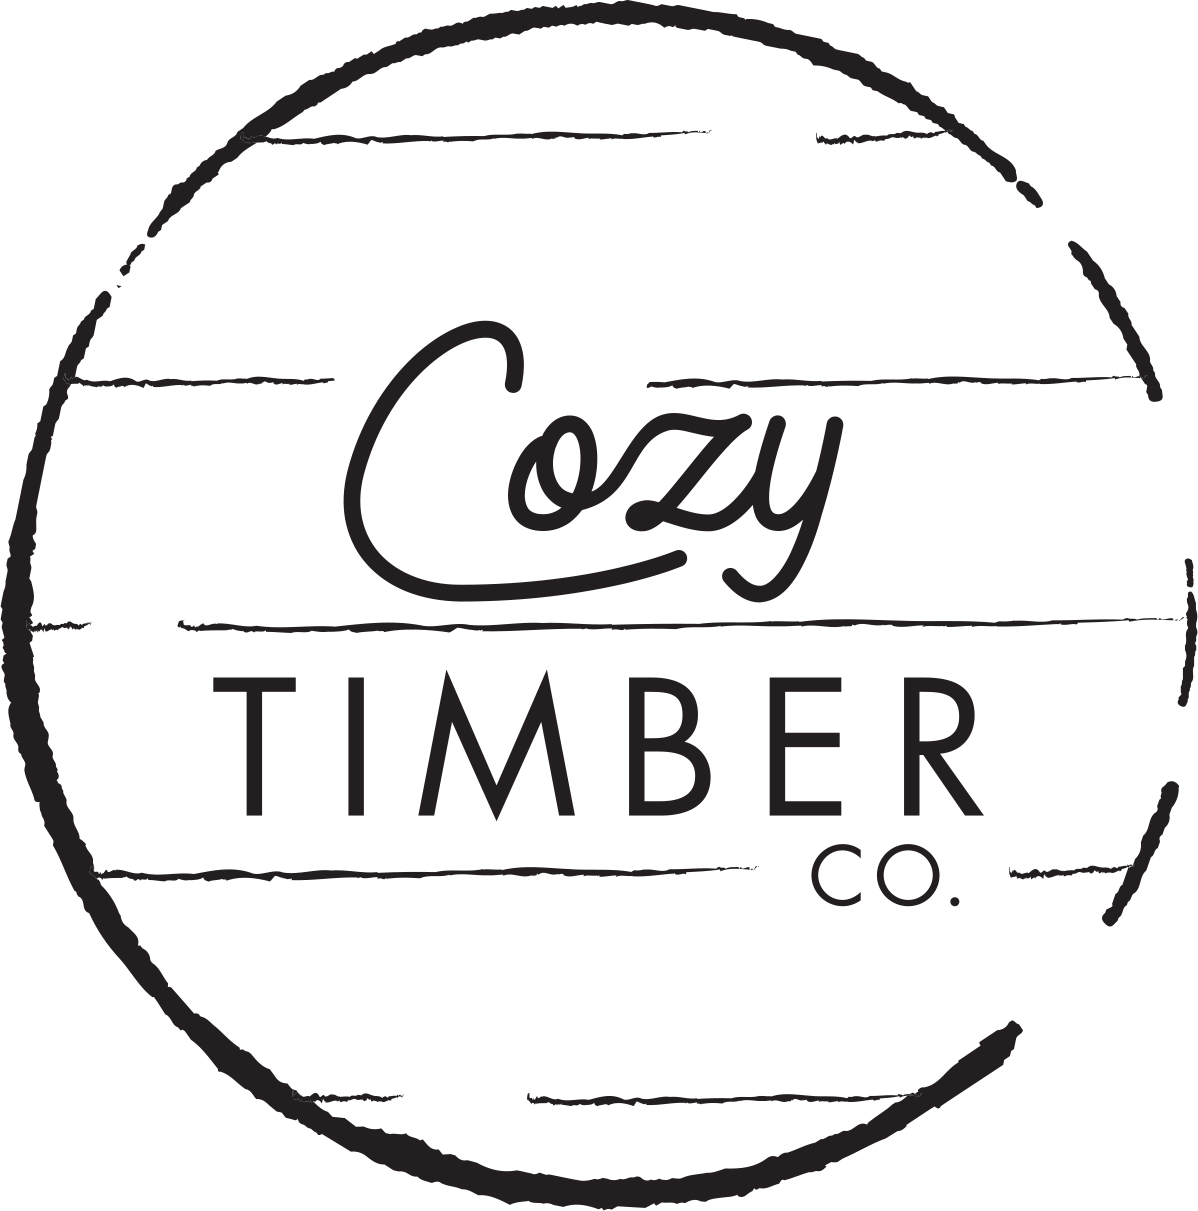 Cozy Timber Co.